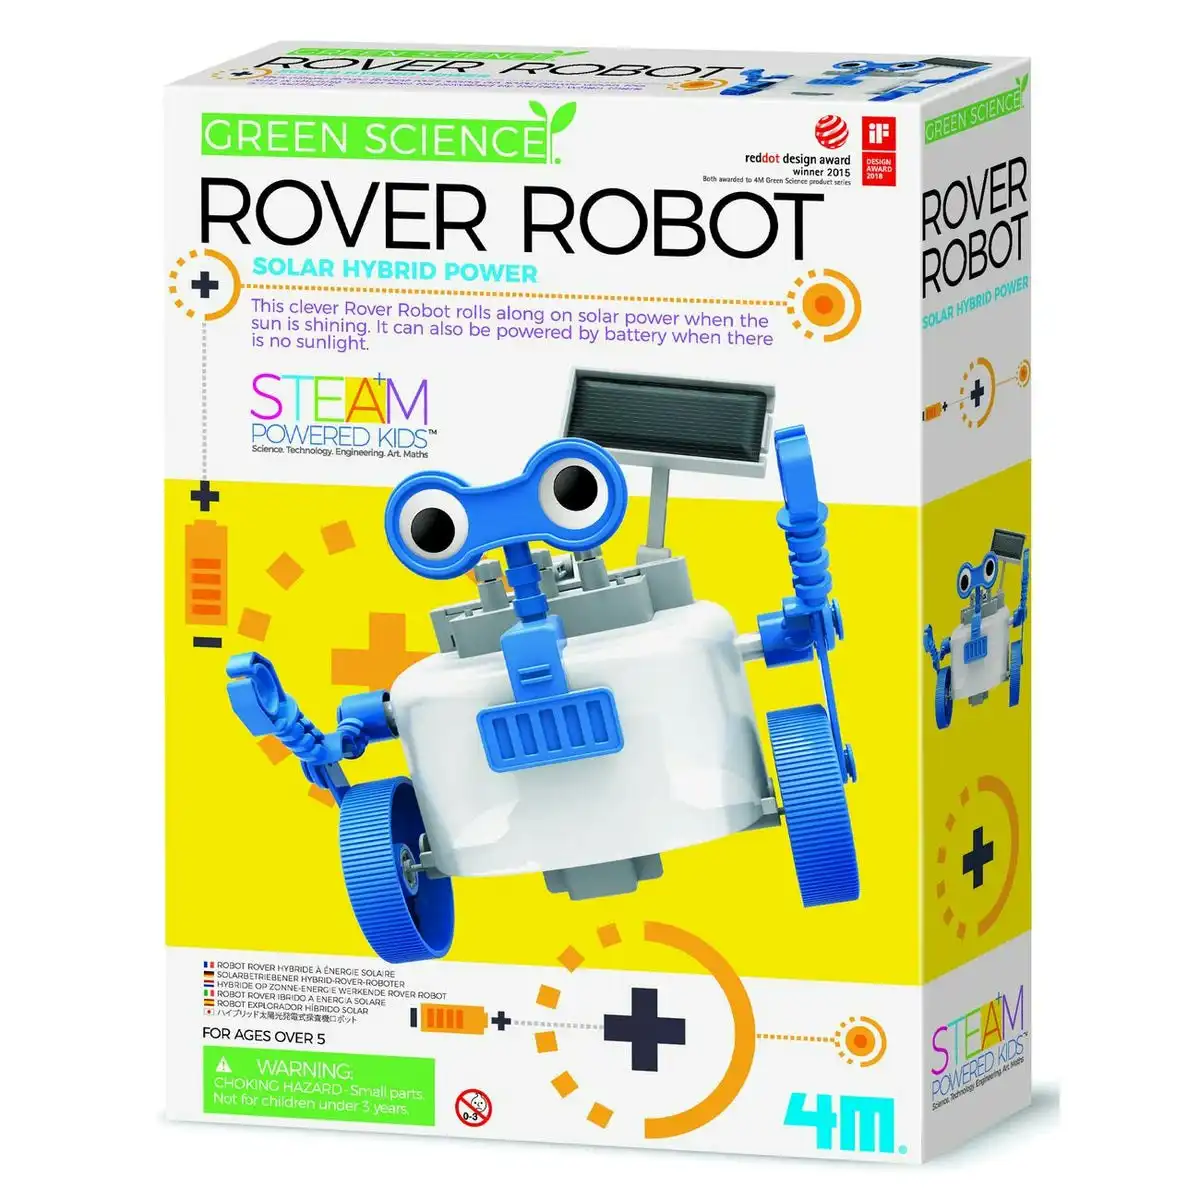 4M - Steam-powered Kids - Green Science Rover Robot - Green Energy